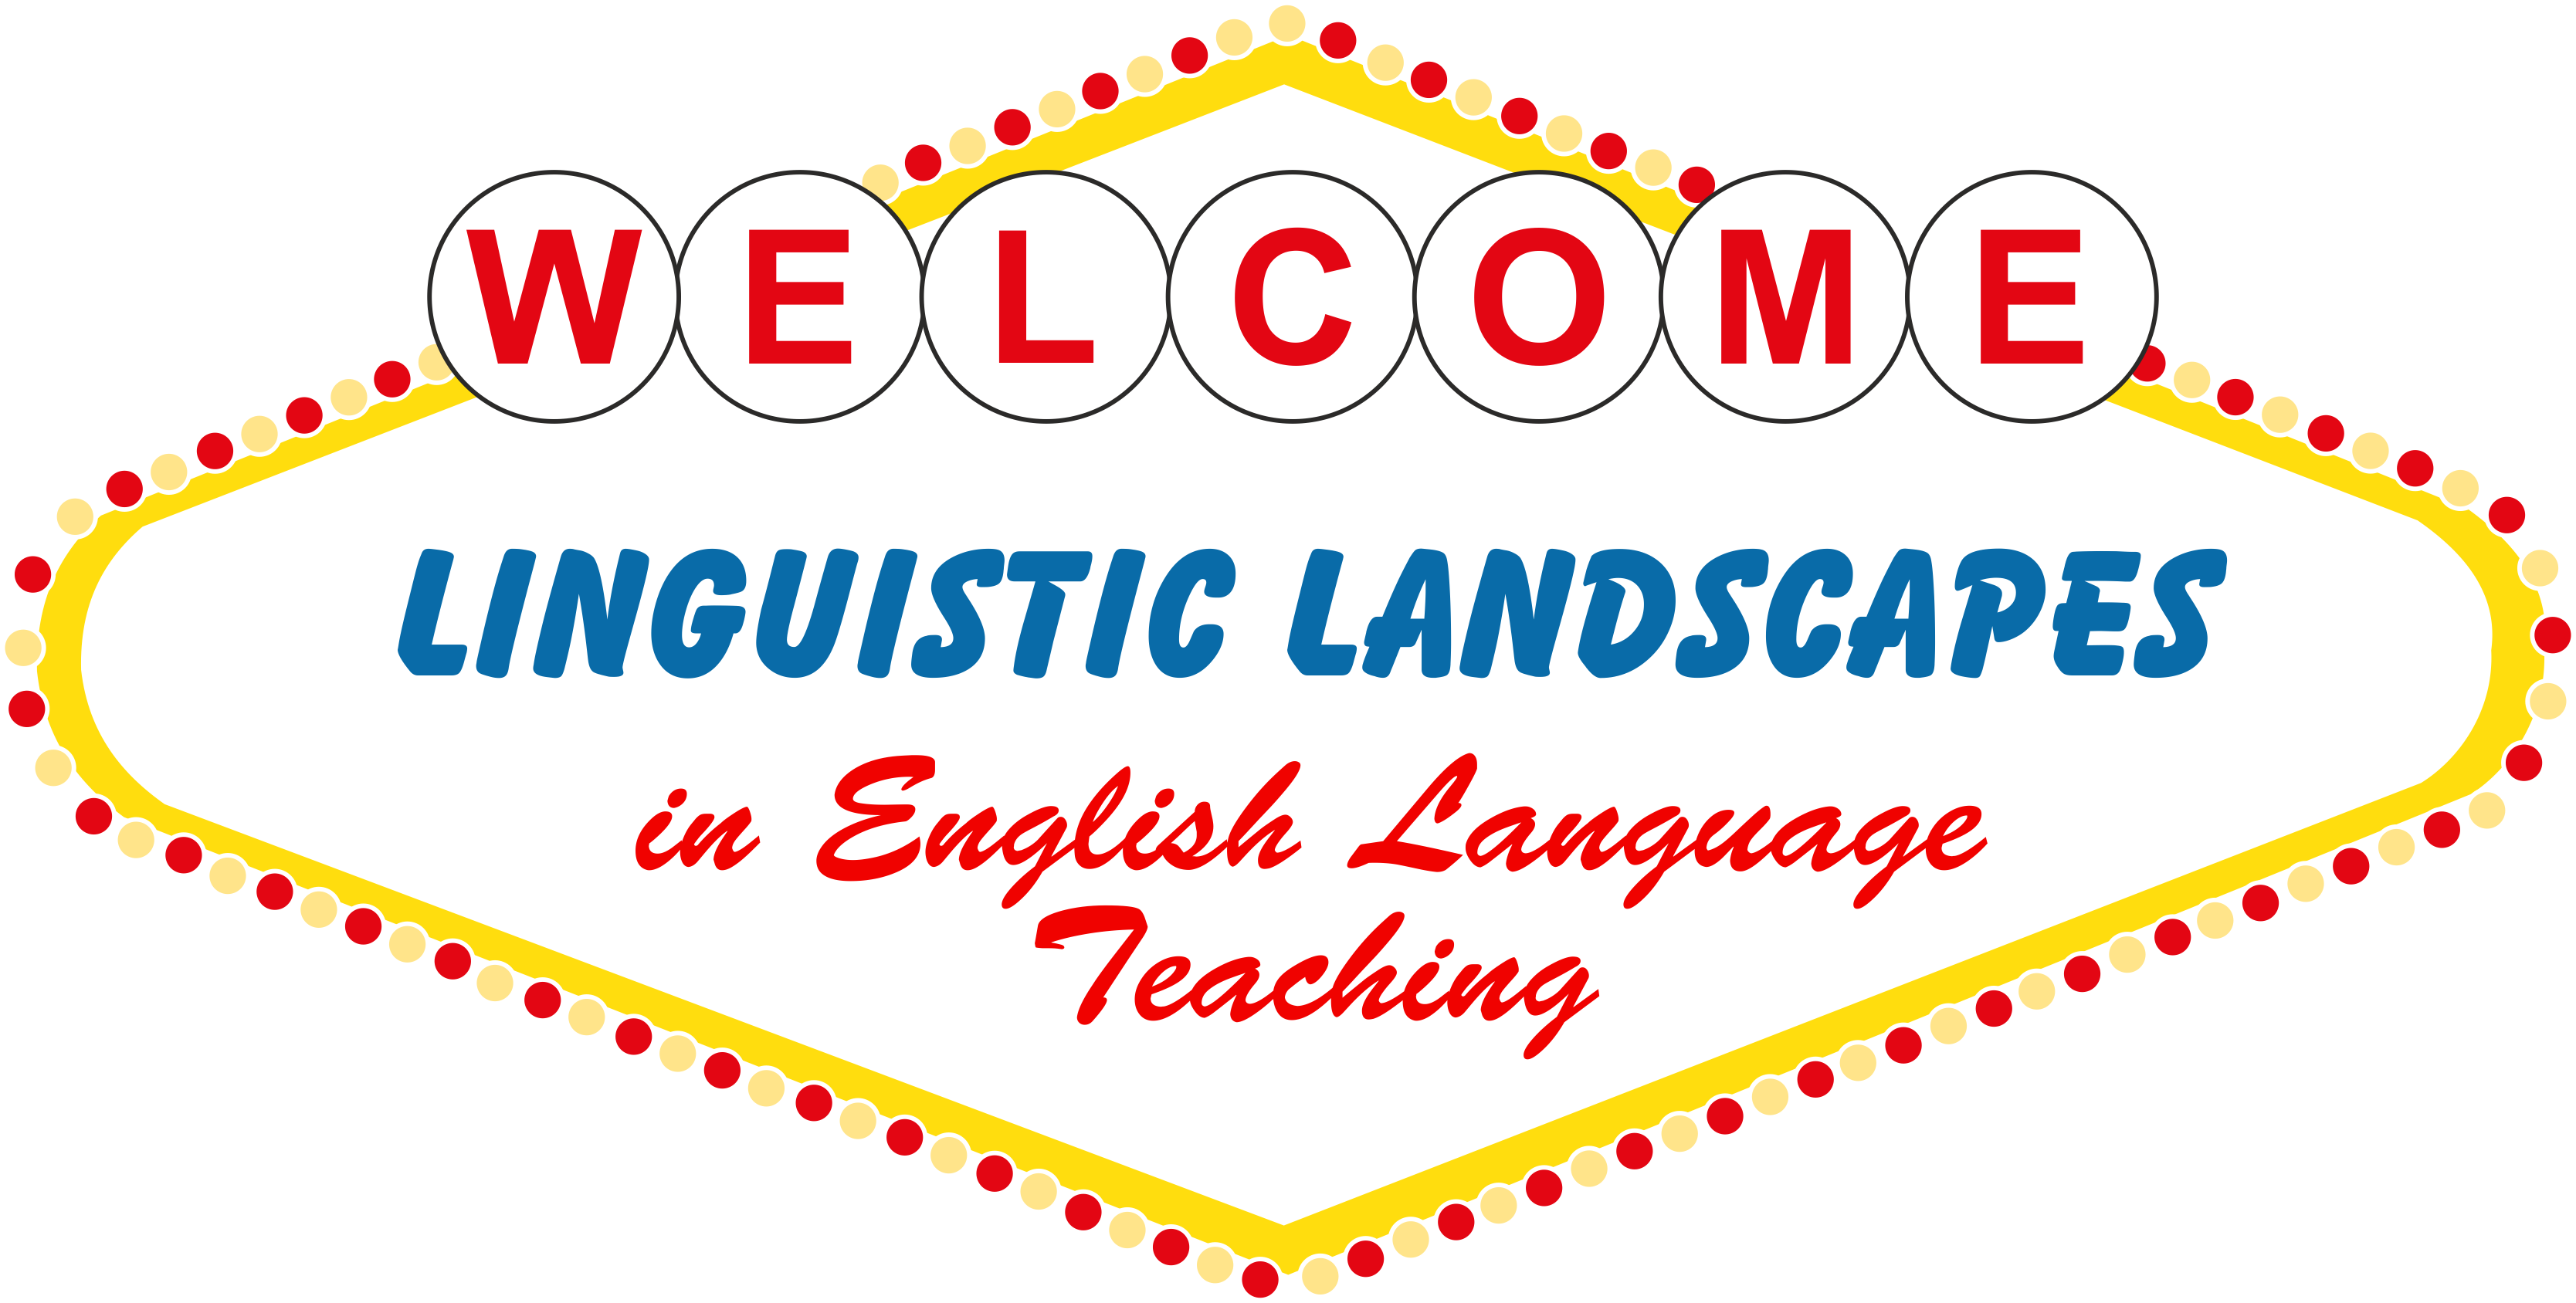 Linguistic Landscapes in English Language Teaching